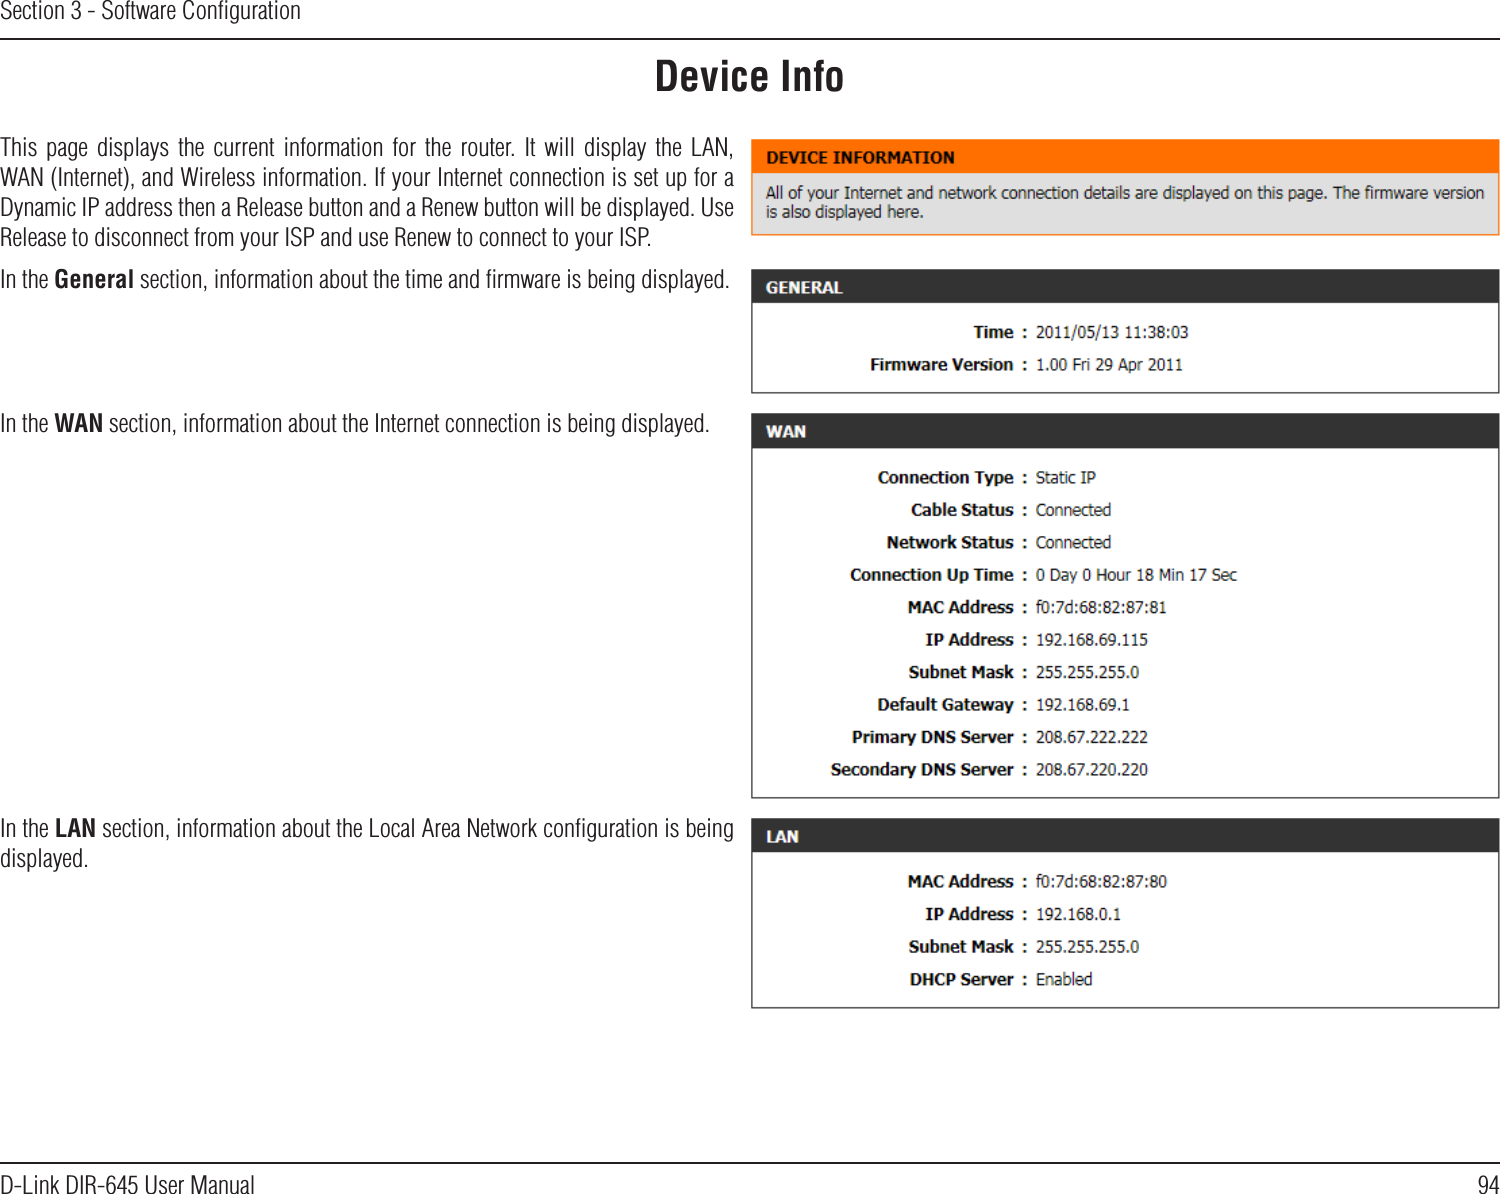 94D-Link DIR-645 User ManualSection 3 - Software ConﬁgurationDevice InfoThis  page  displays  the  current  information  for  the  router.  It  will  display  the  LAN, WAN (Internet), and Wireless information. If your Internet connection is set up for a Dynamic IP address then a Release button and a Renew button will be displayed. Use Release to disconnect from your ISP and use Renew to connect to your ISP.In the General section, information about the time and ﬁrmware is being displayed.In the WAN section, information about the Internet connection is being displayed.In the LAN section, information about the Local Area Network conﬁguration is being displayed.